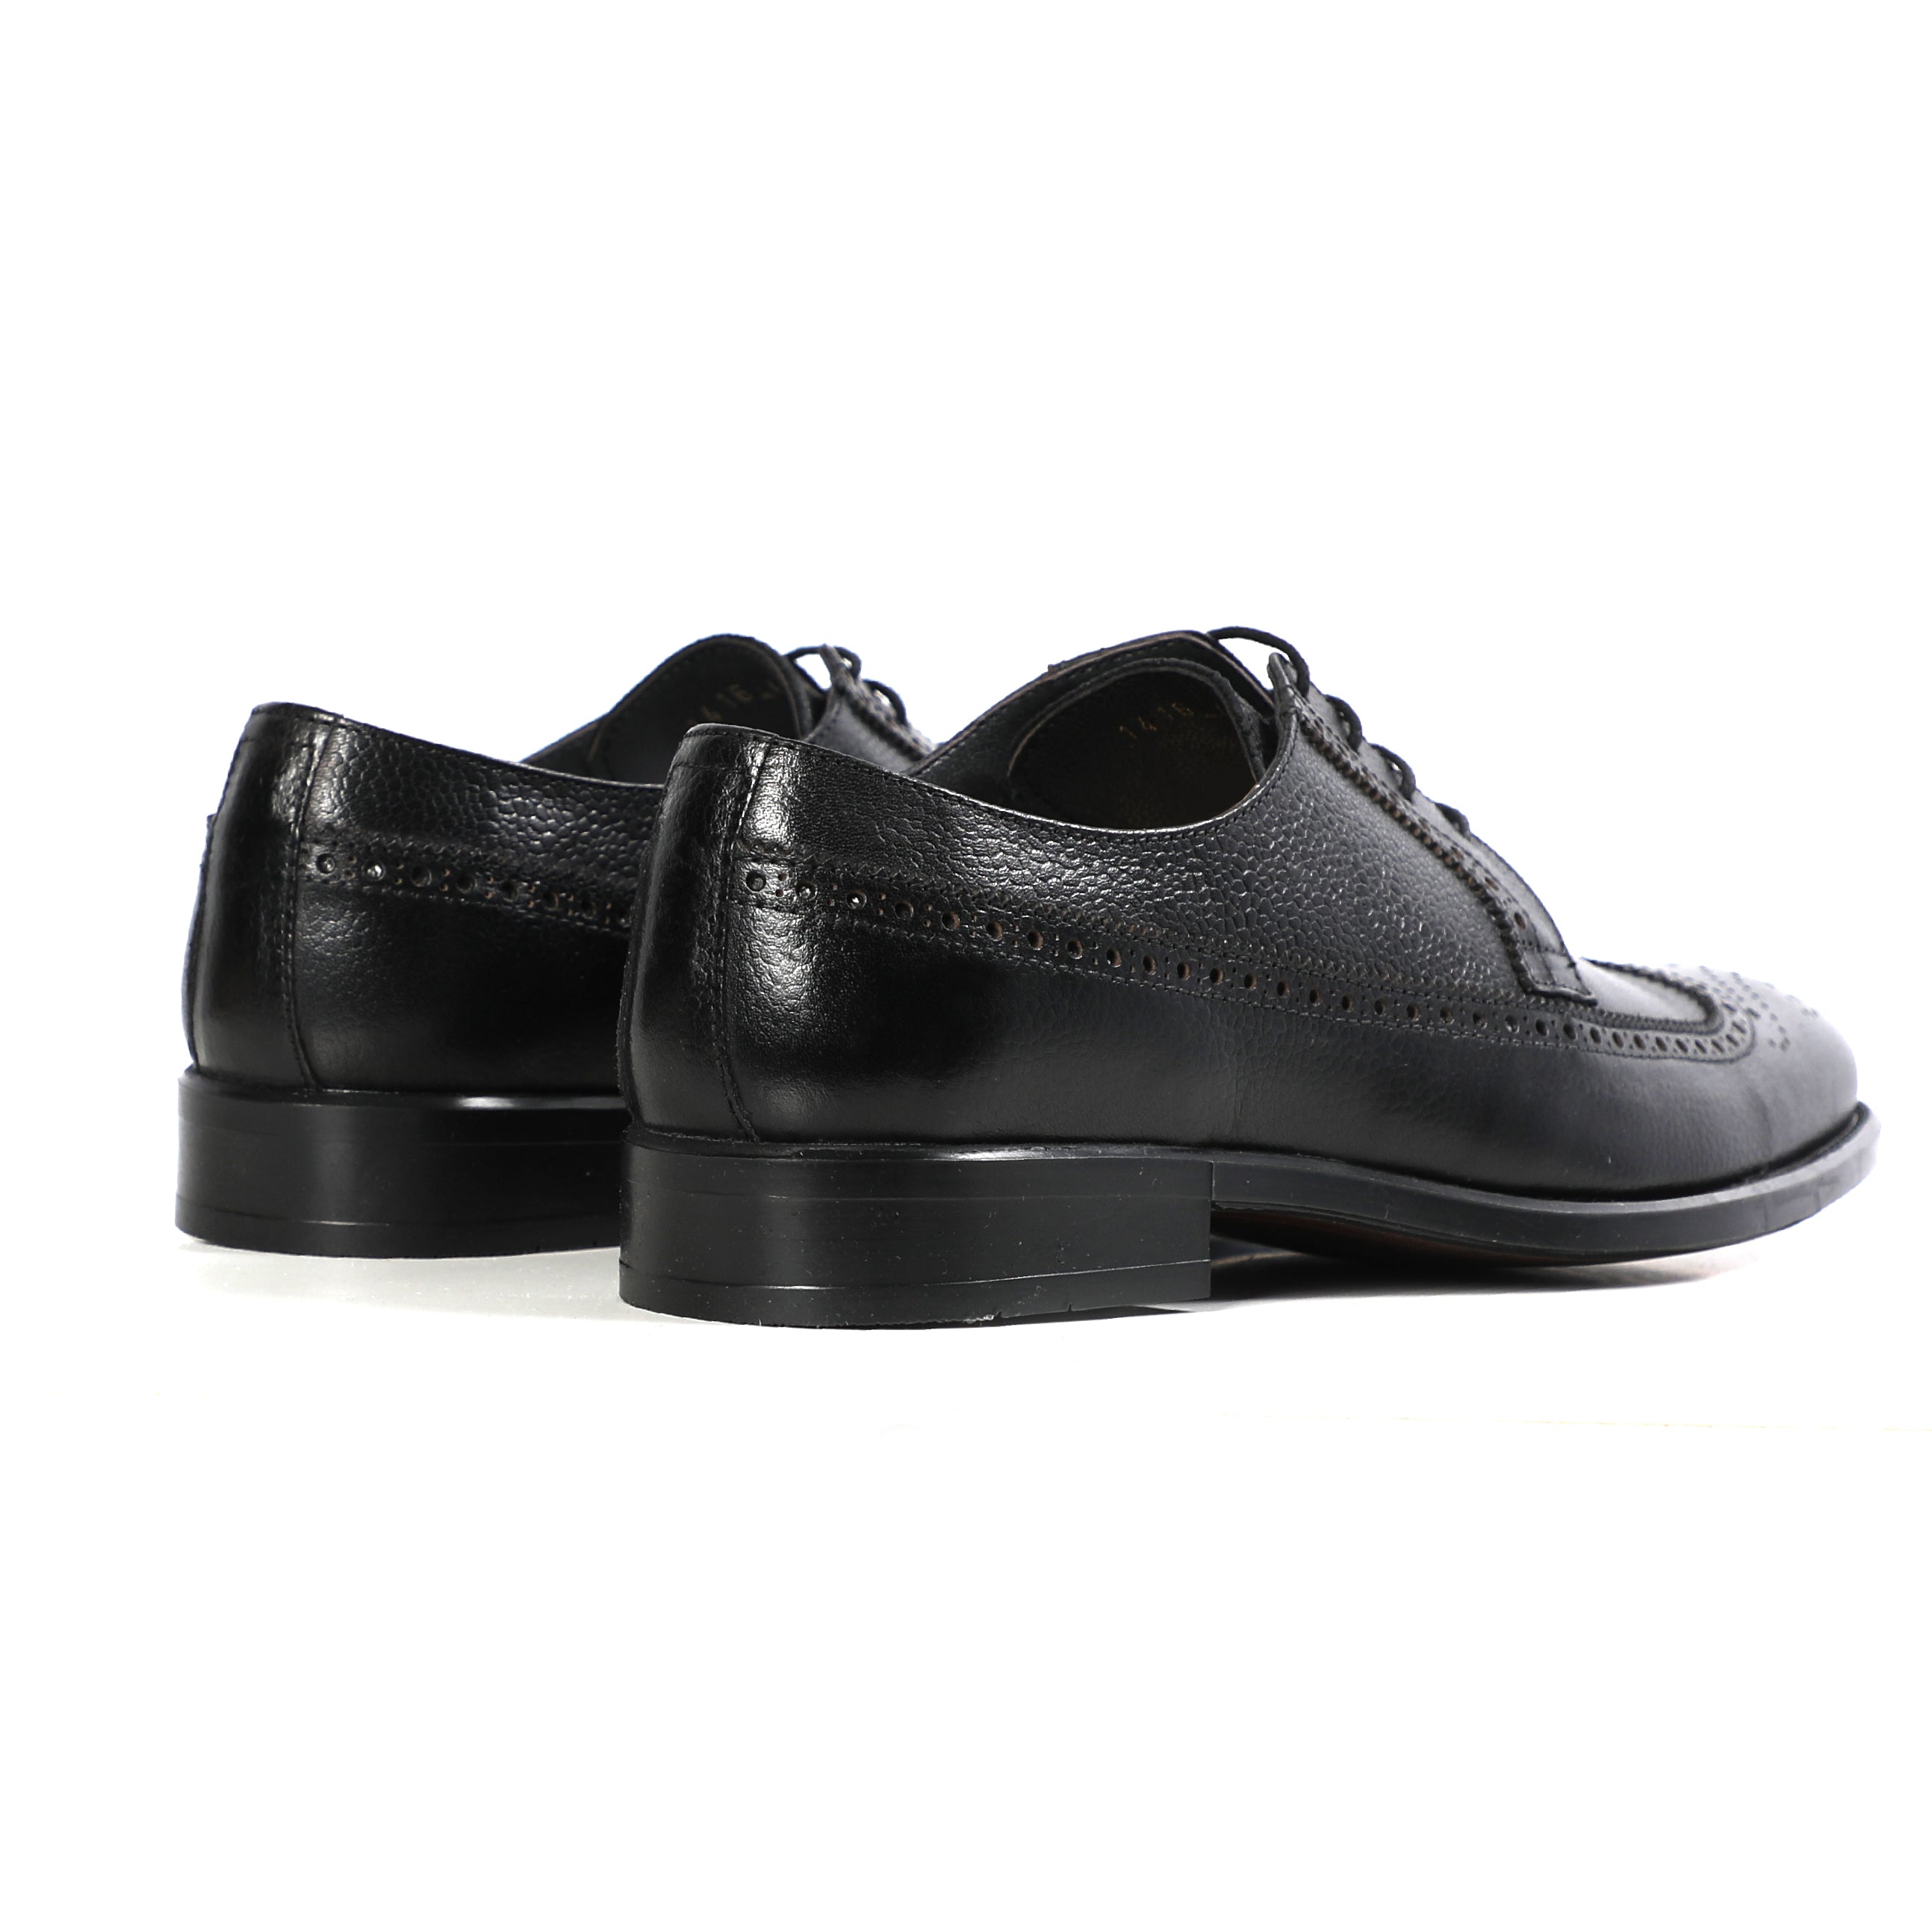 Men Black Classic Shoes With Crafted Cut